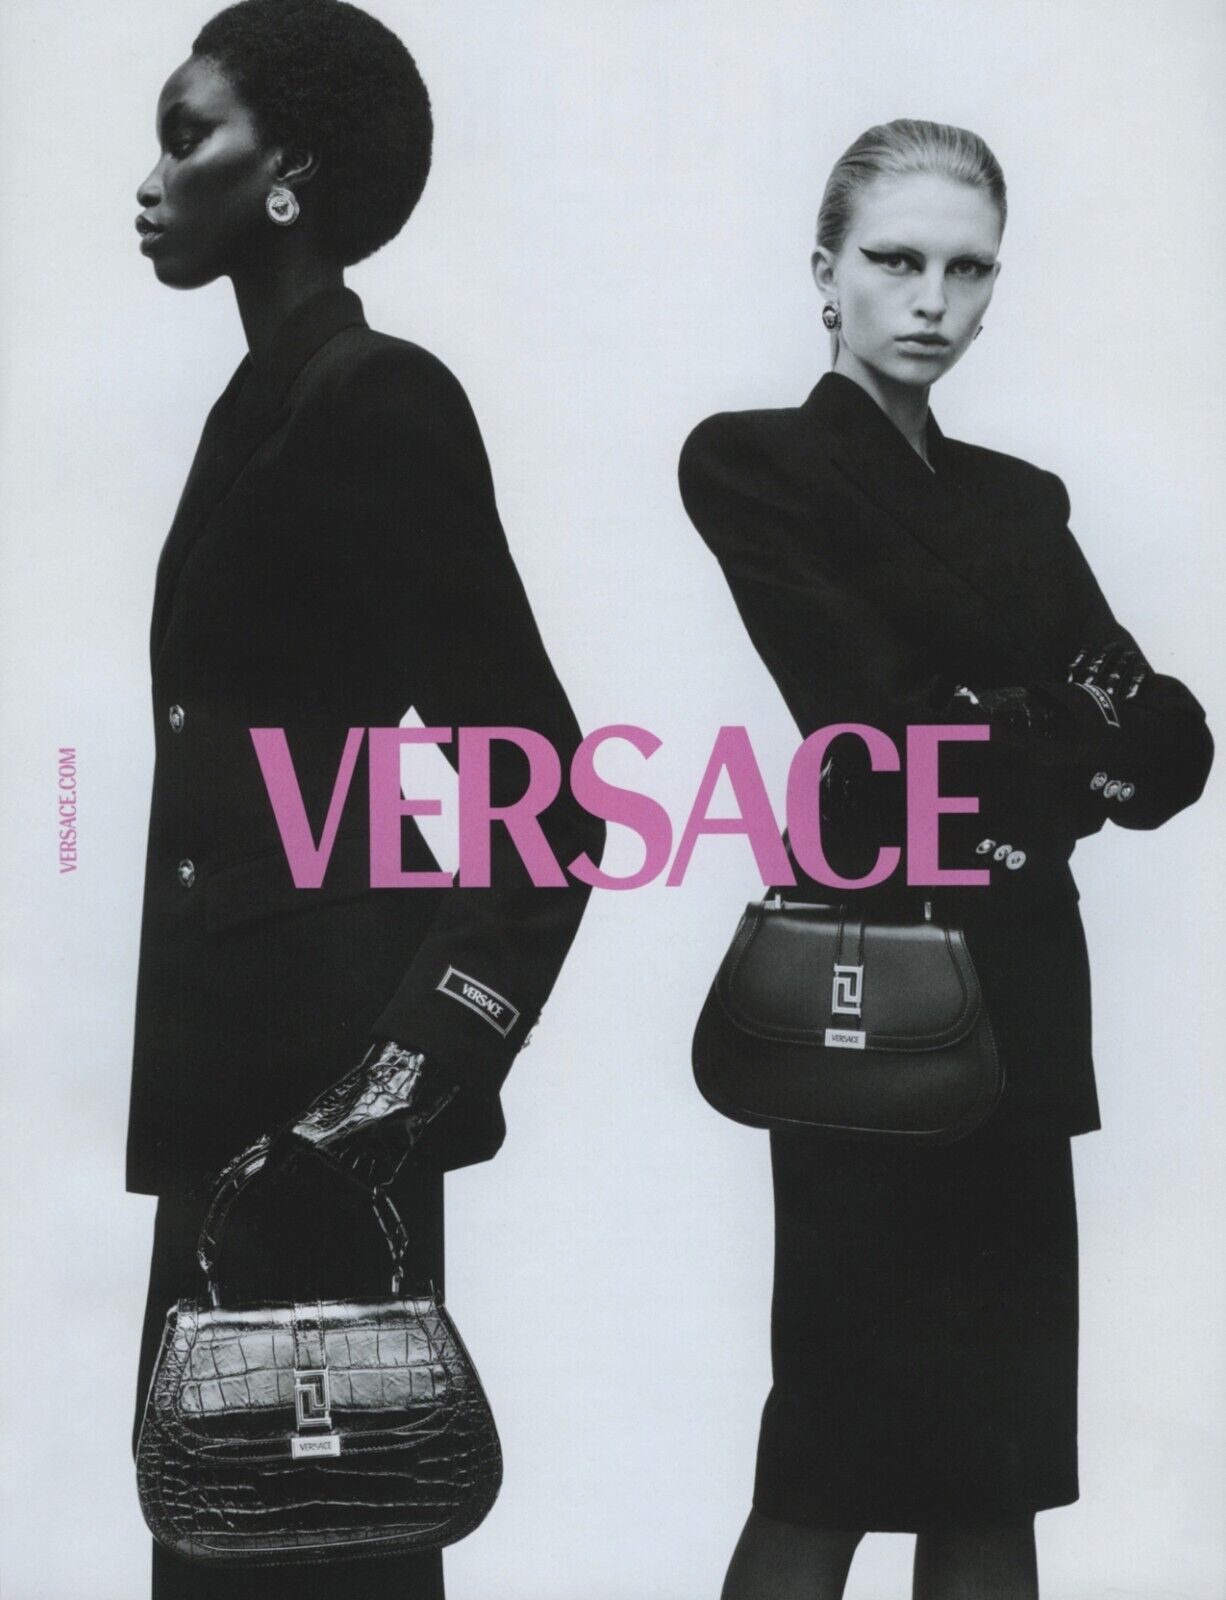 VERSACE - Luxury Bag Style Model Modern Suits - Magazine 1 Page PRINT AD